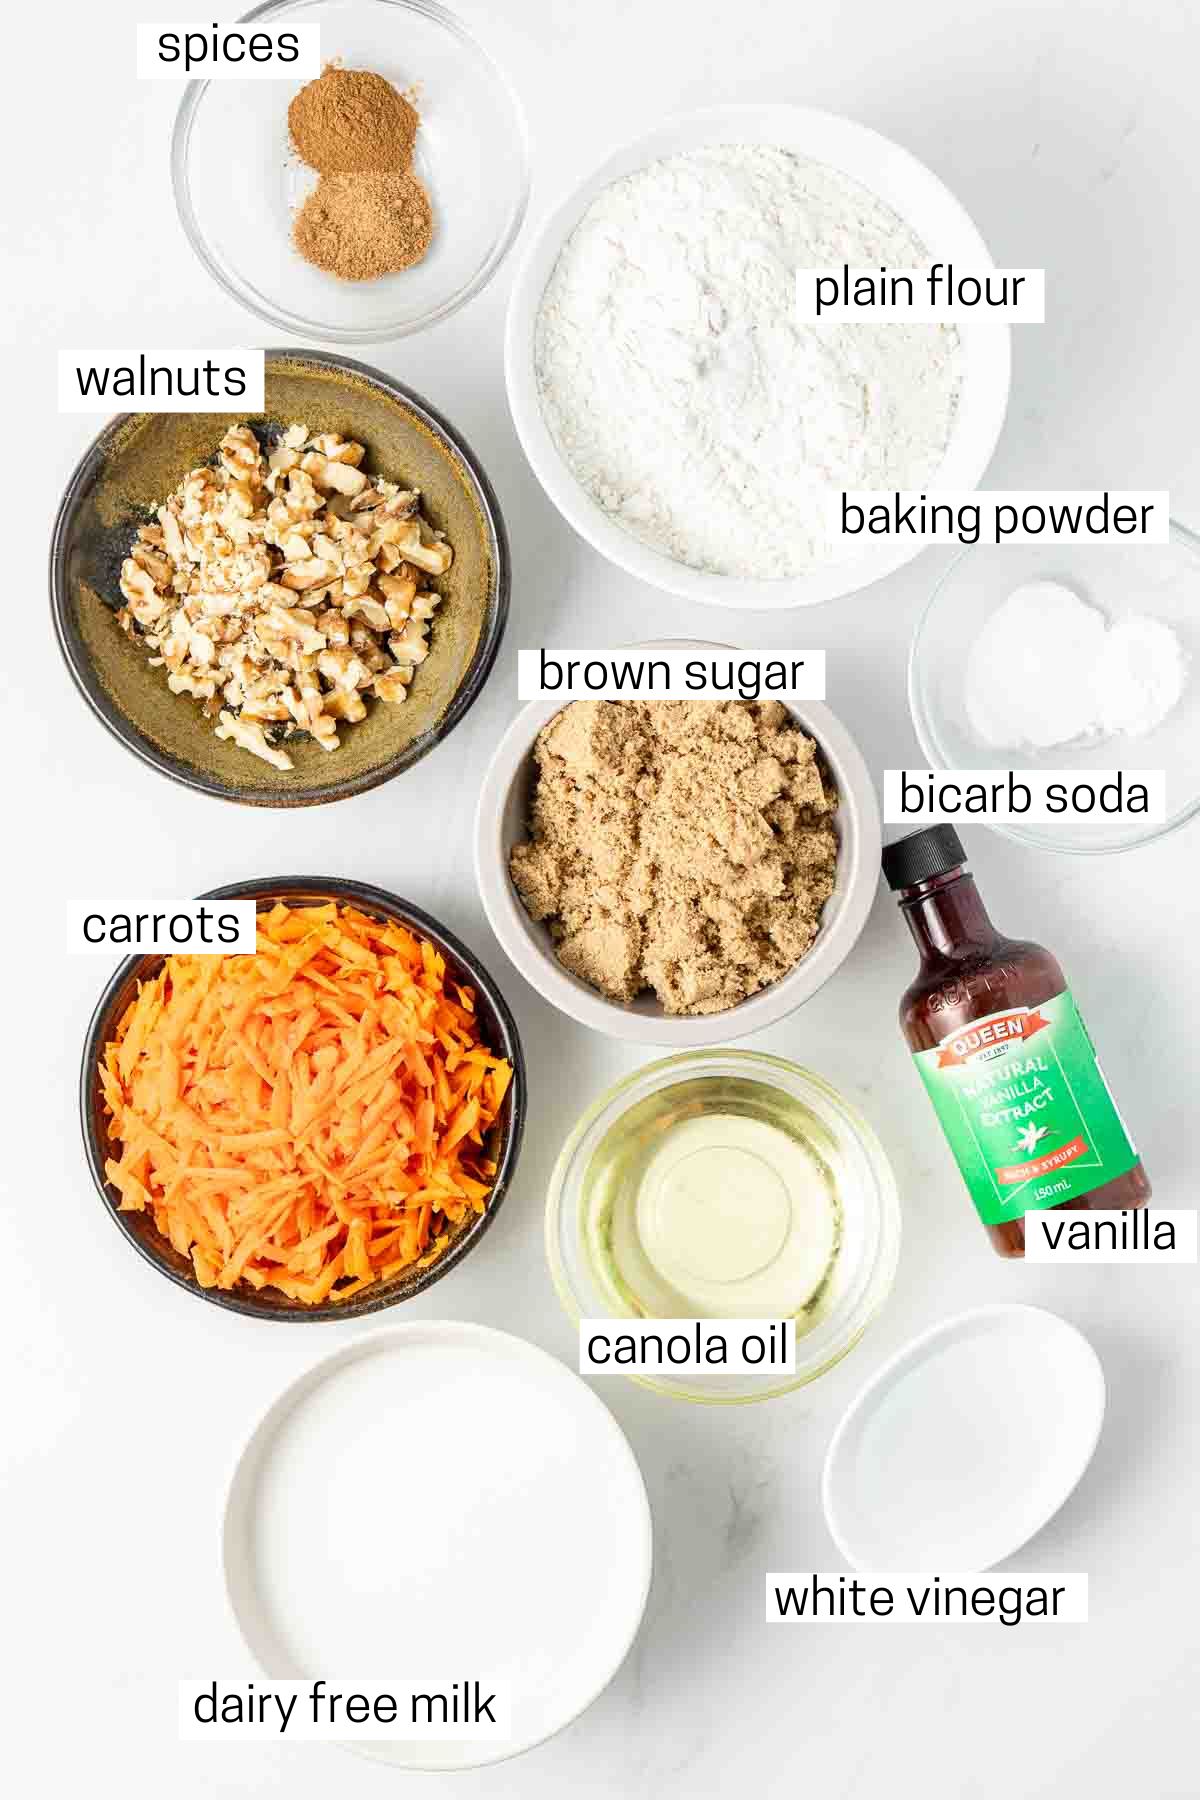 All ingredients needed to make vegan carrot cake cupcakes laid out in small bowls.